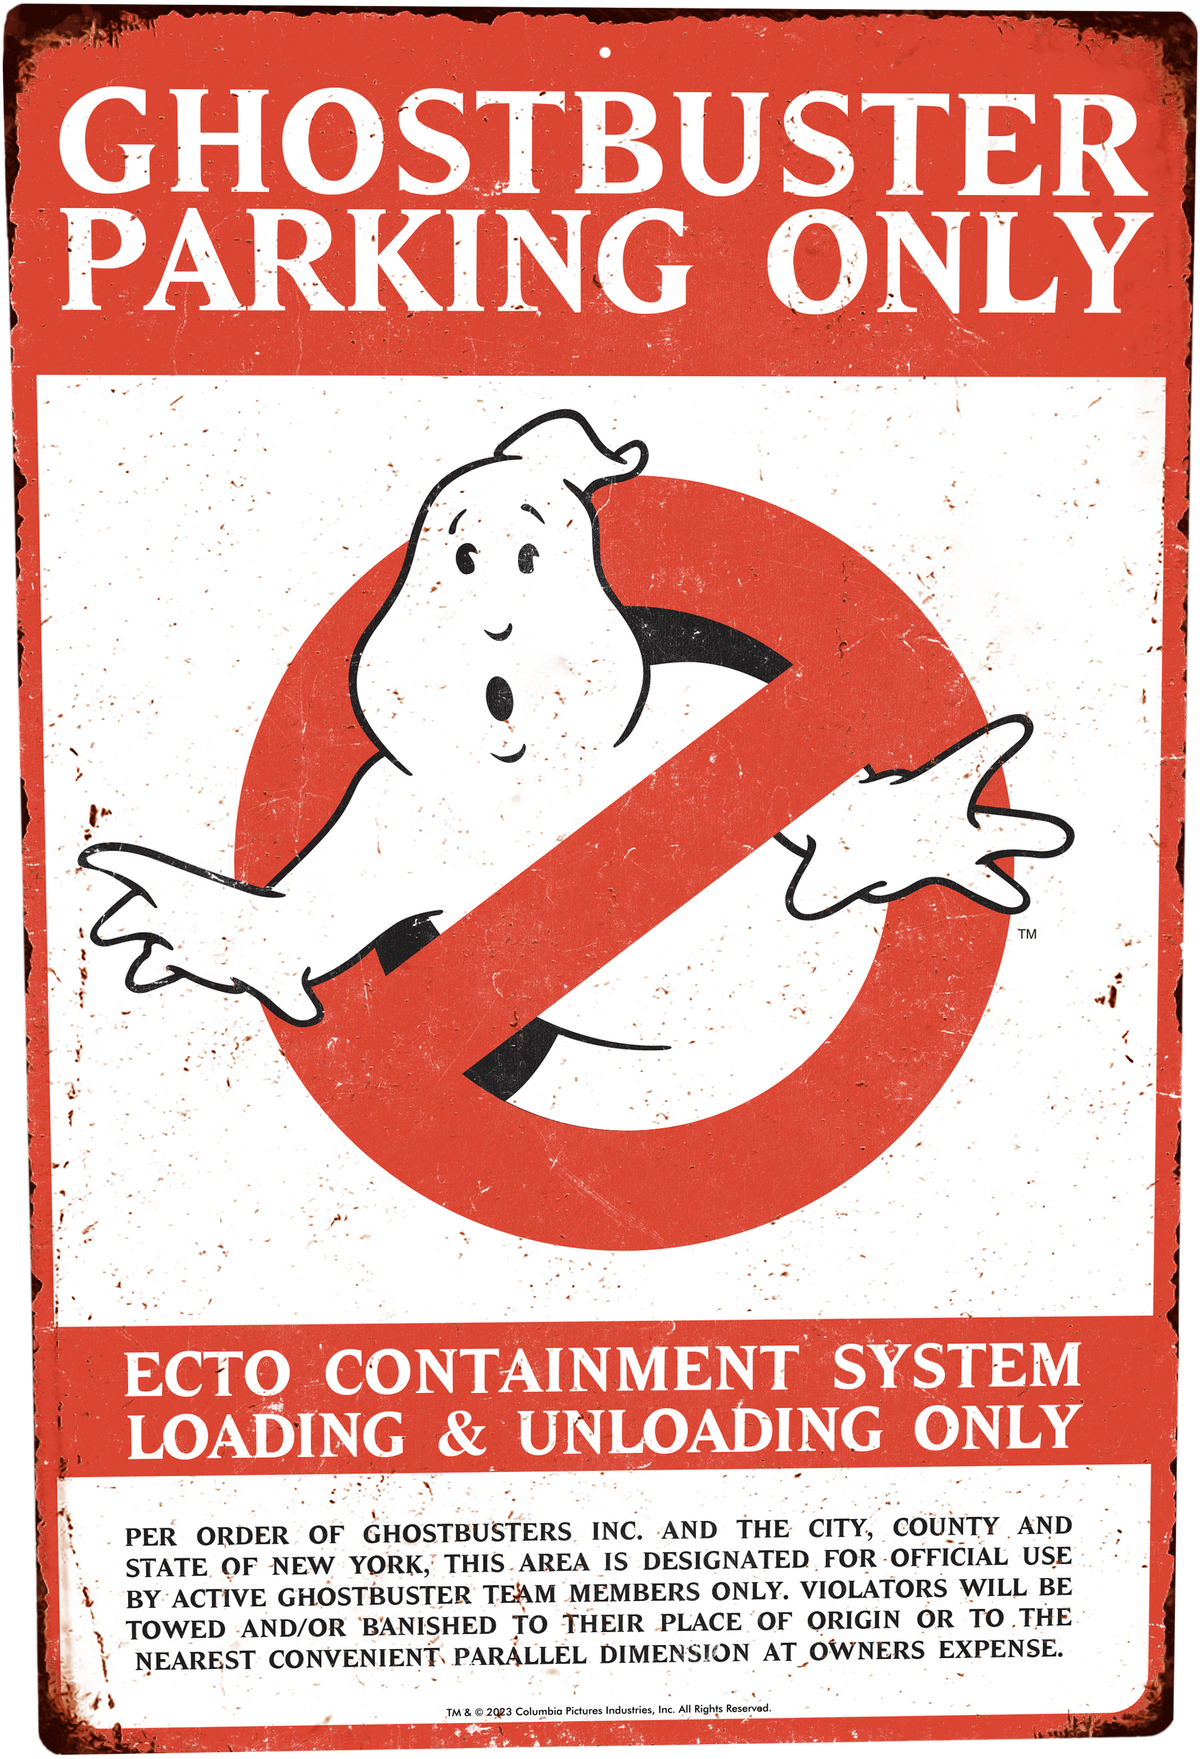 Ghostbusters: Parking Only Metal Sign